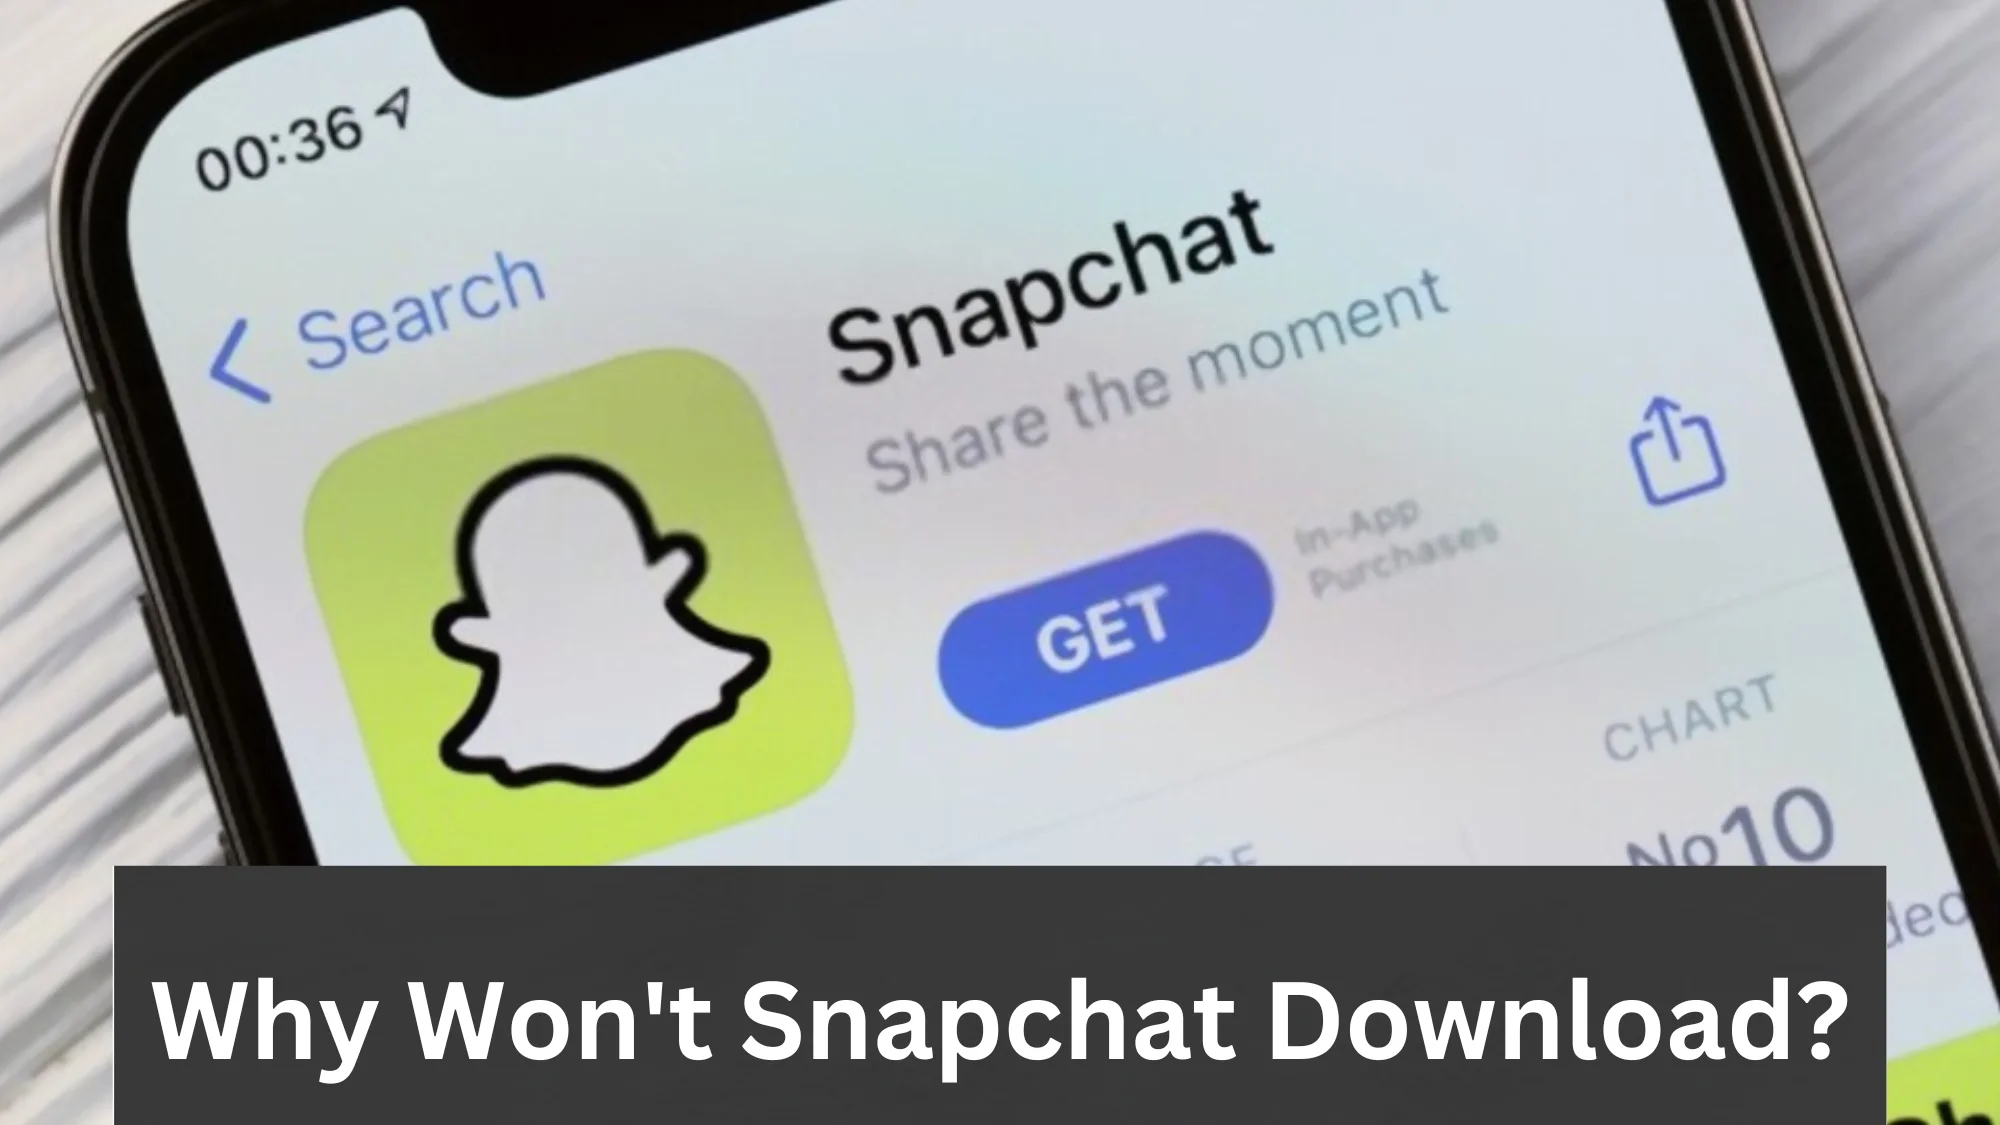 Why Won't Snapchat Download on my iphone